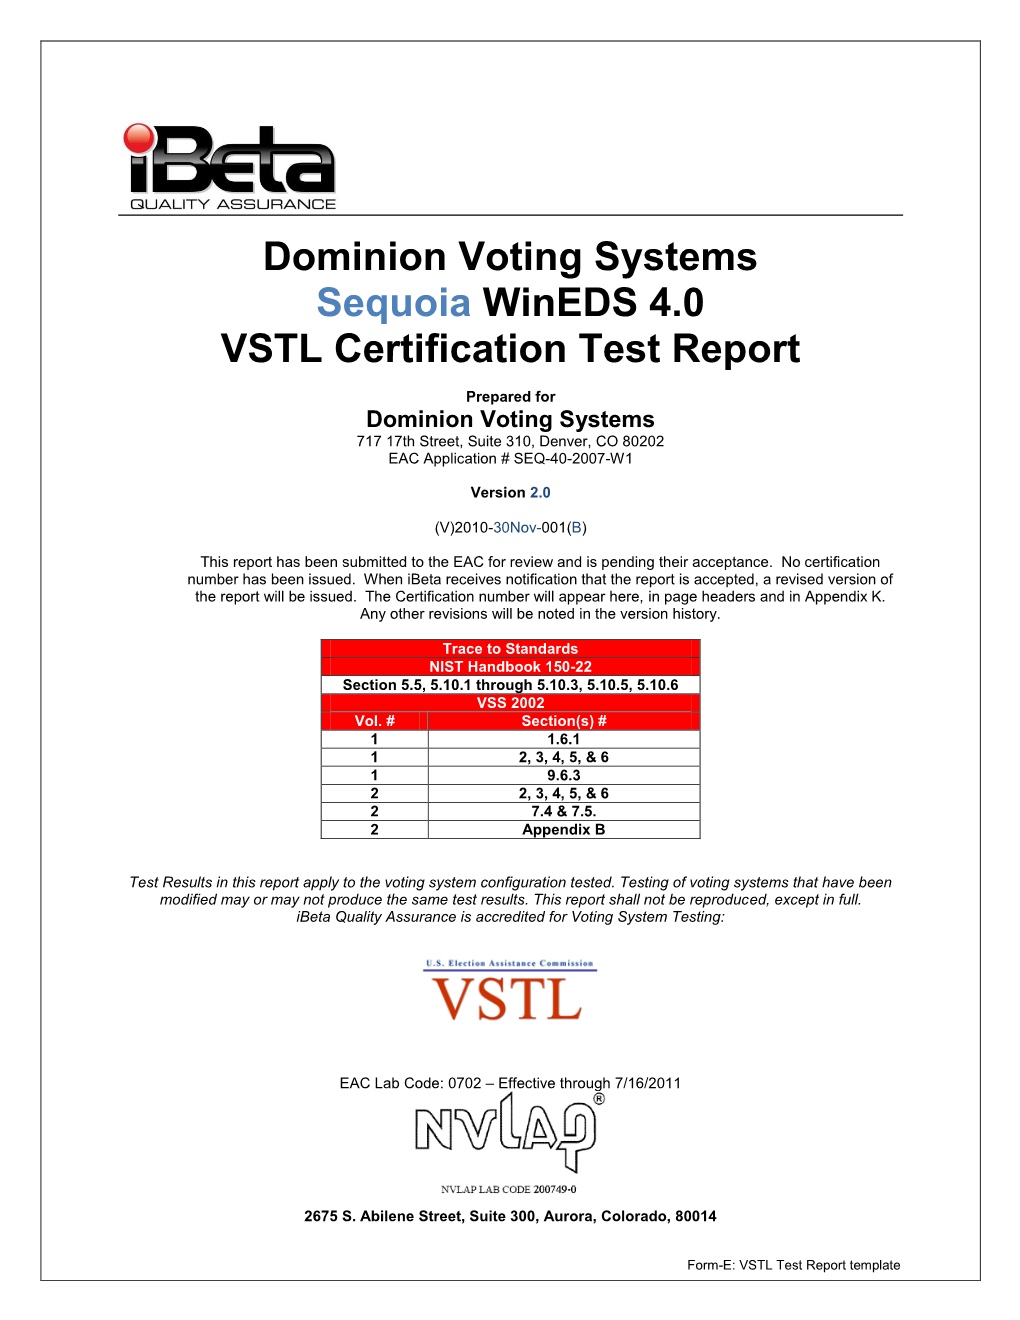 Dominion Voting Systems Sequoia Wineds 4.0 VSTL Certification Test Report